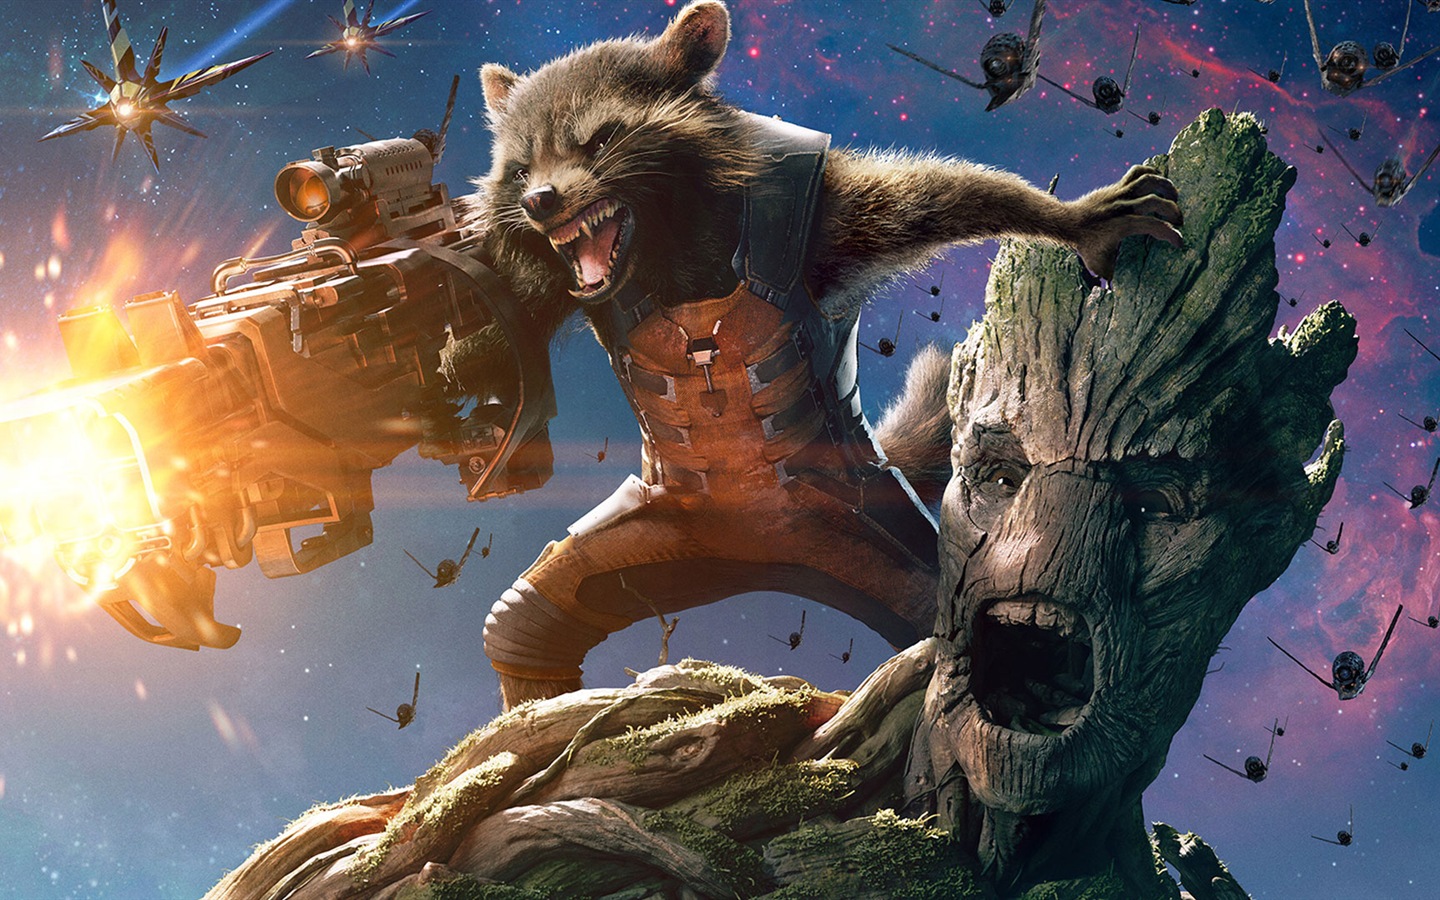 Guardians of the Galaxy 2014 HD movie wallpapers #14 - 1440x900